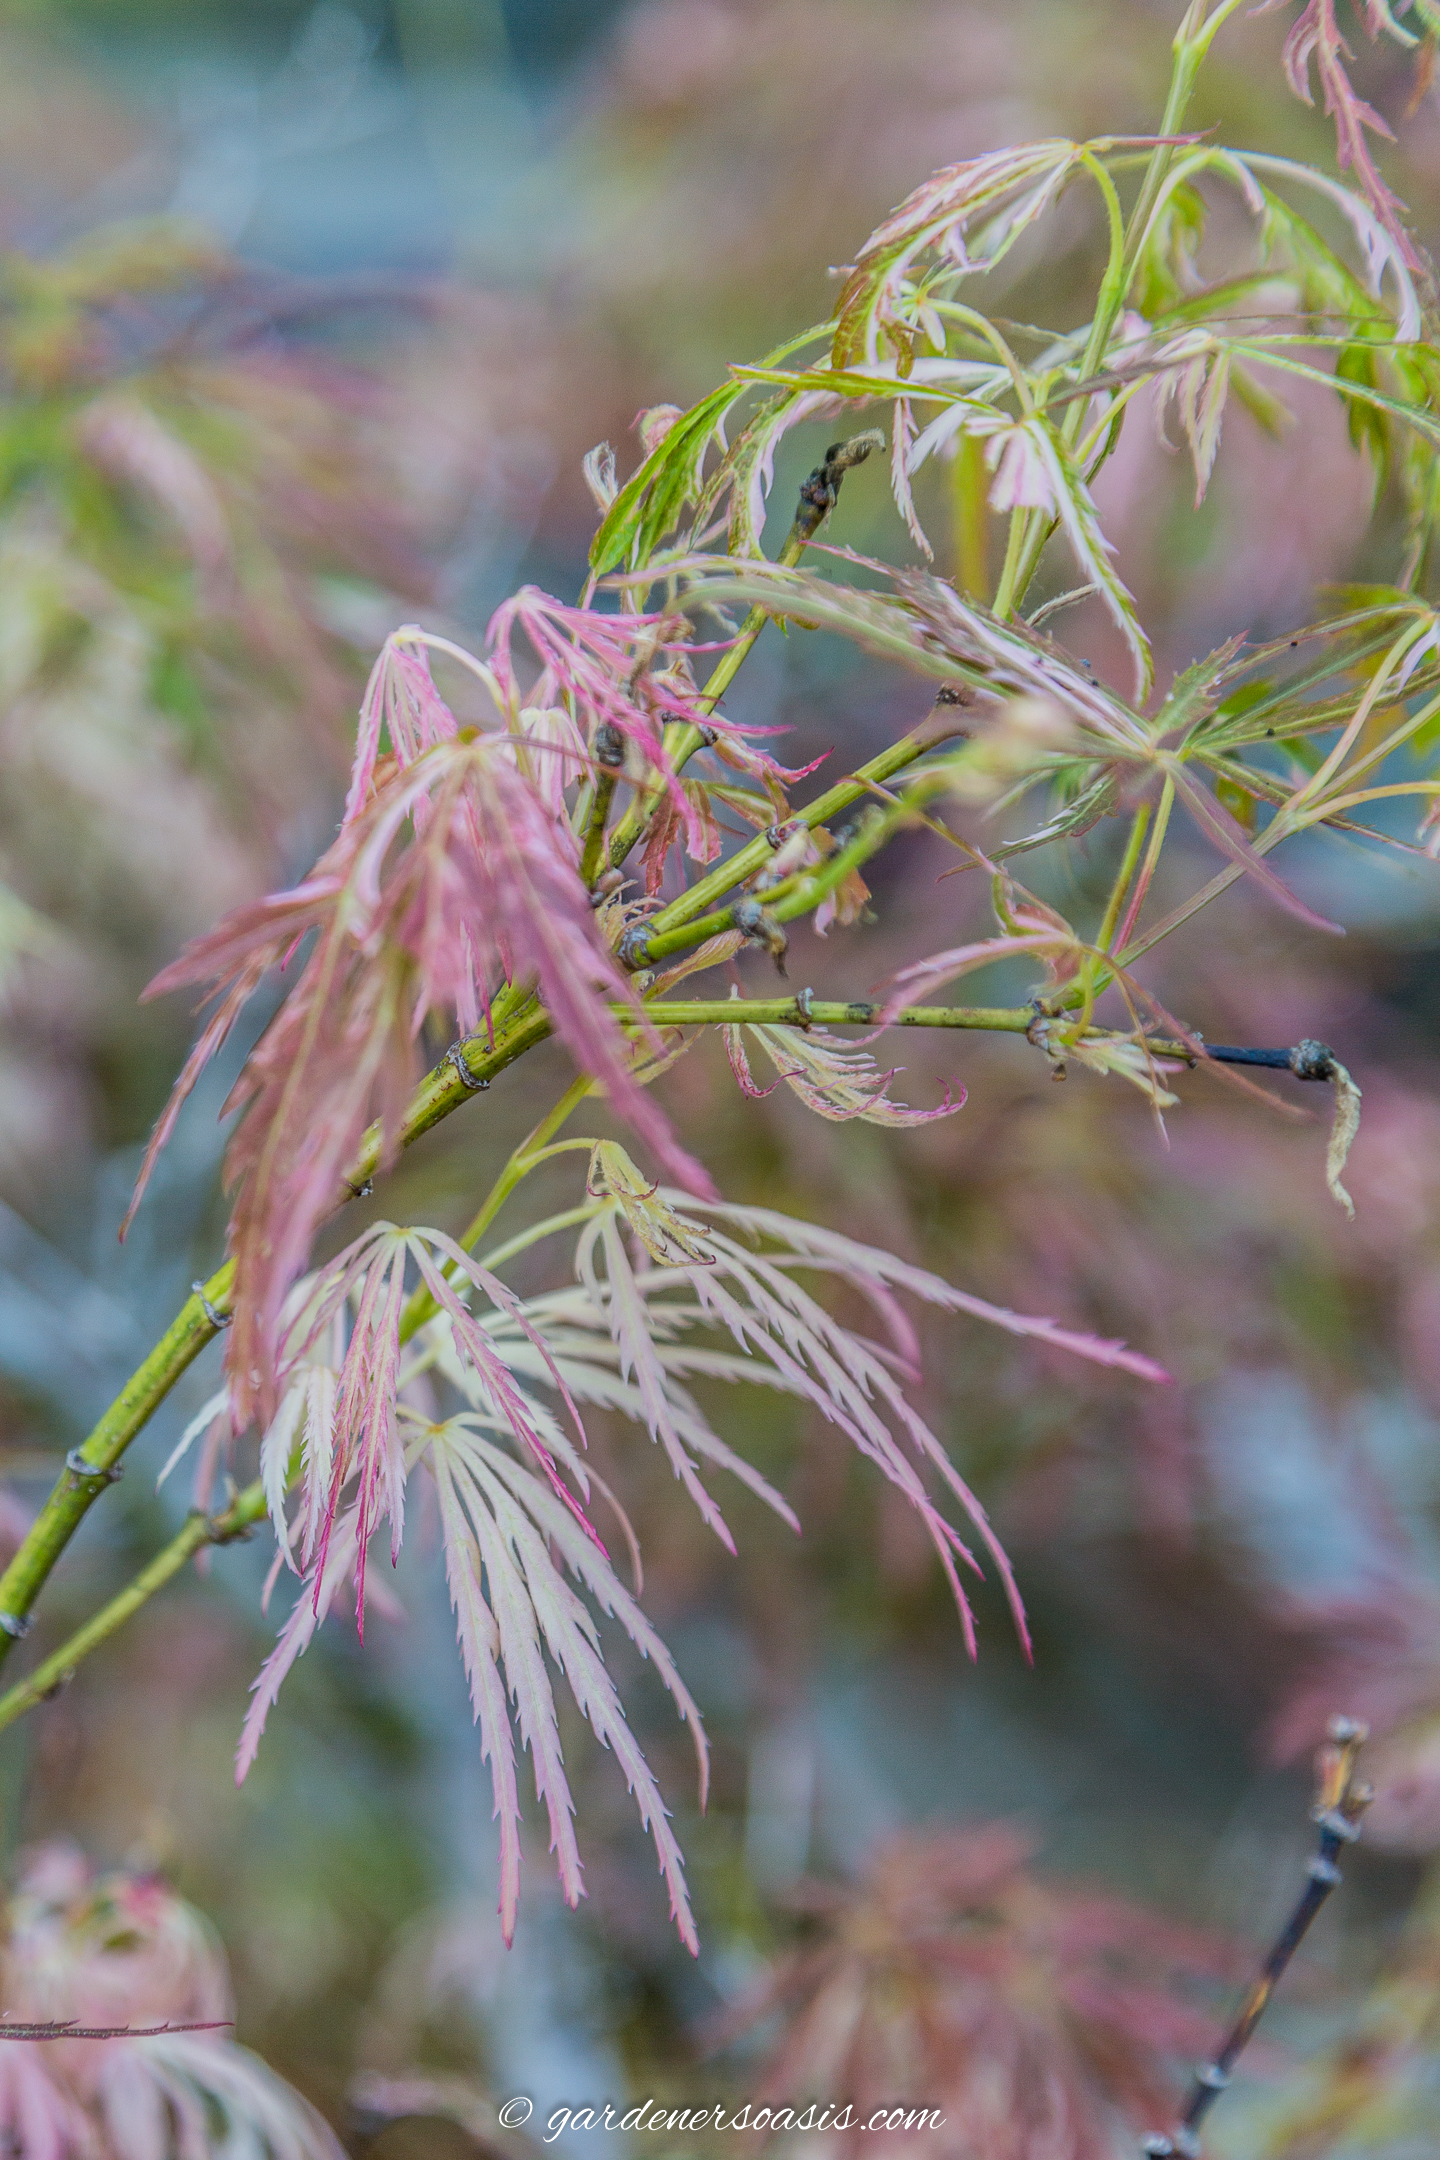 Acer Palamtum 'Toyama Nishiki' with white, red and green leaves